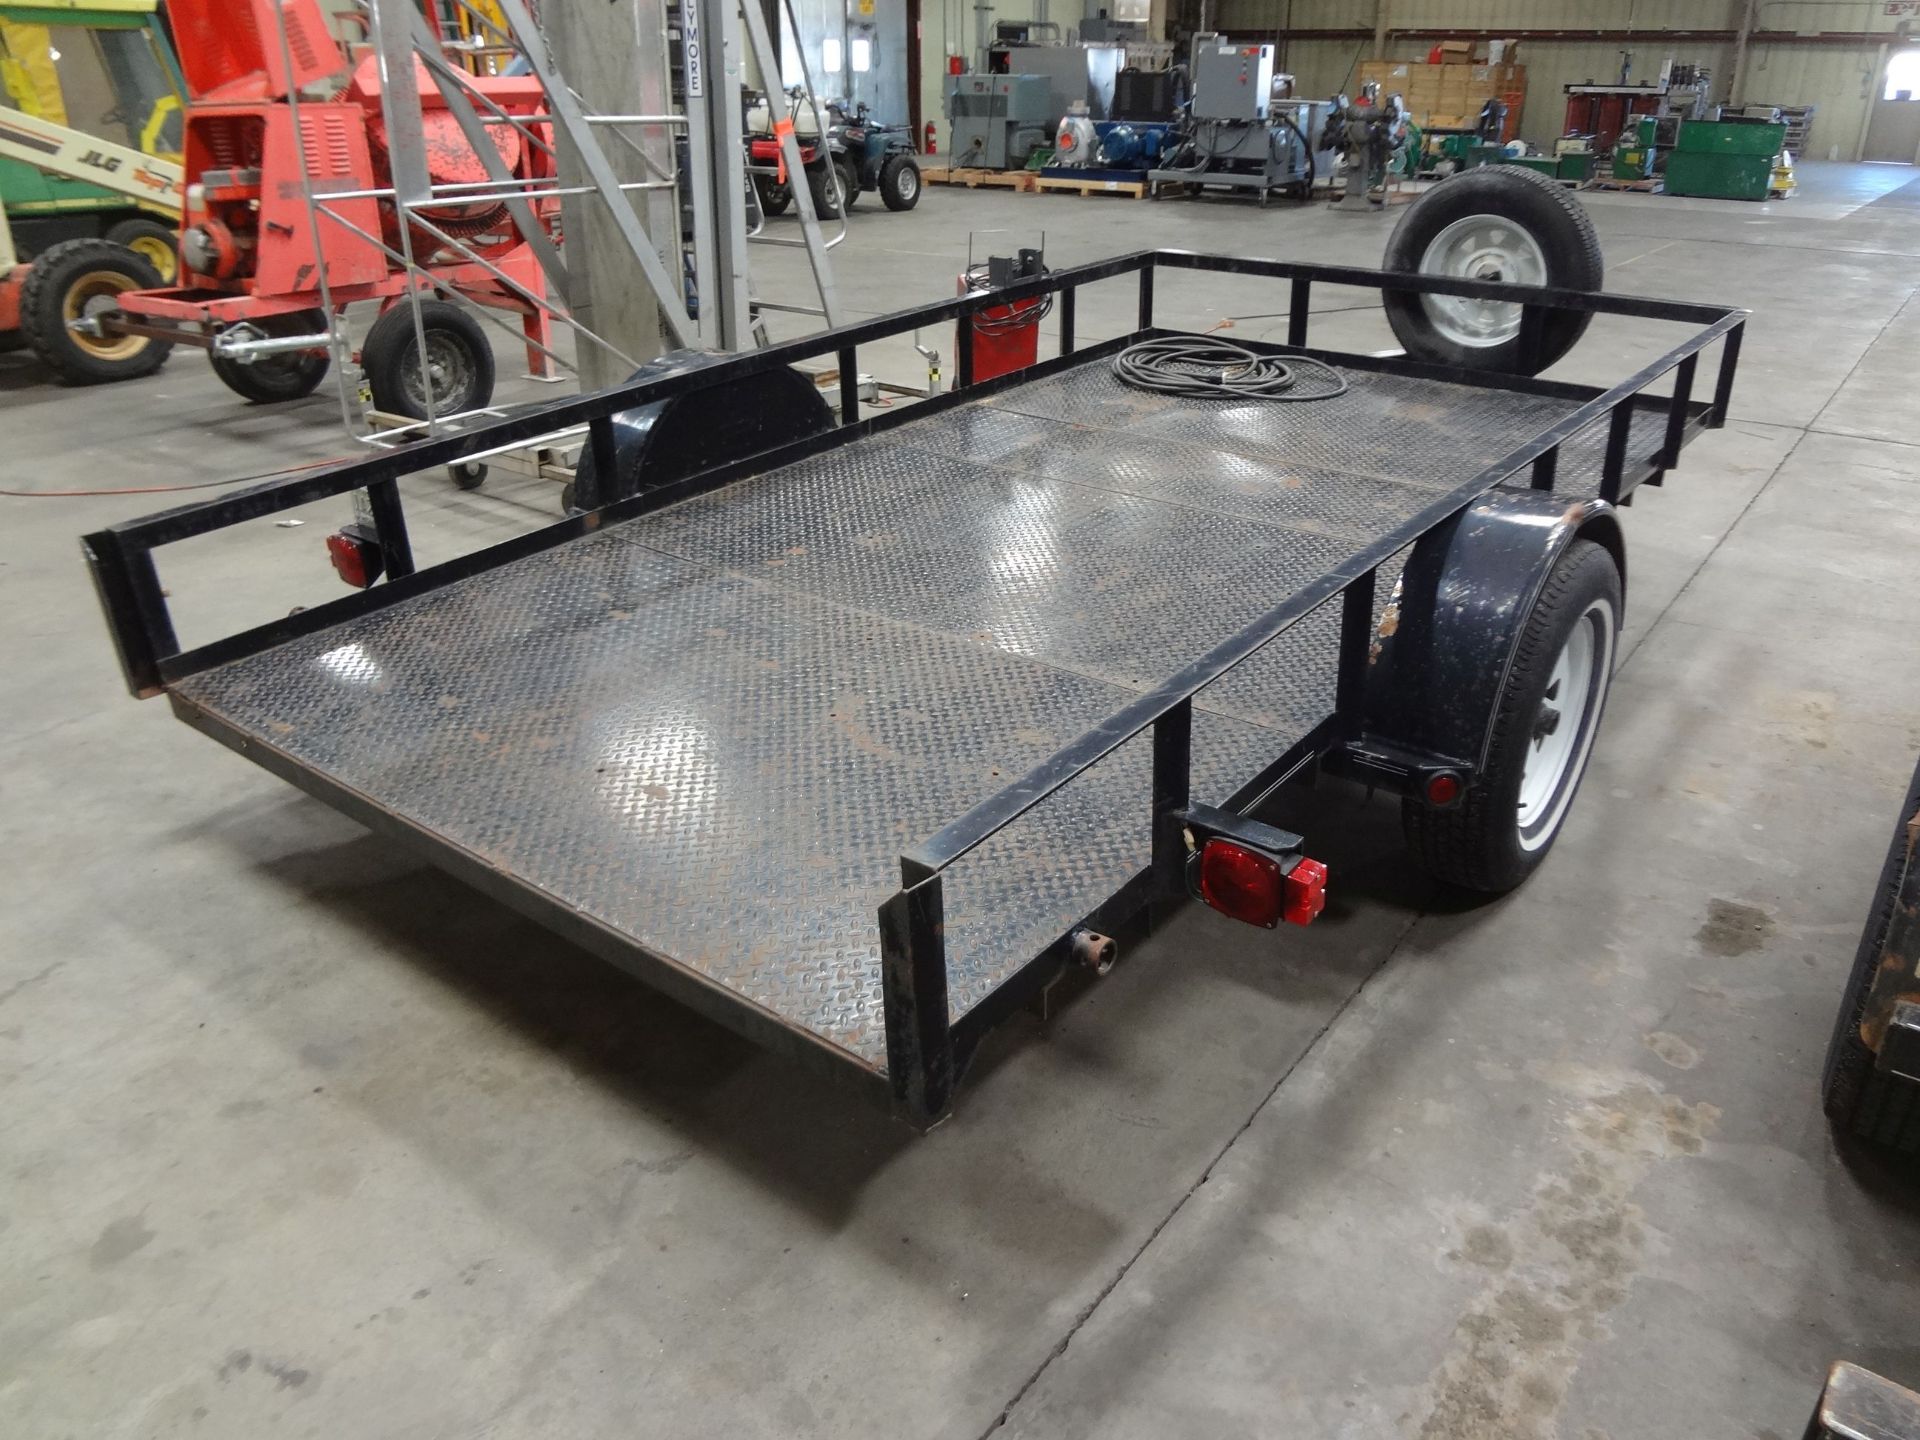 12' LOAD-TRAIL SINGLE AXEL TRAILER, 2" BALL HITCH, STEEL DECK - Image 2 of 4